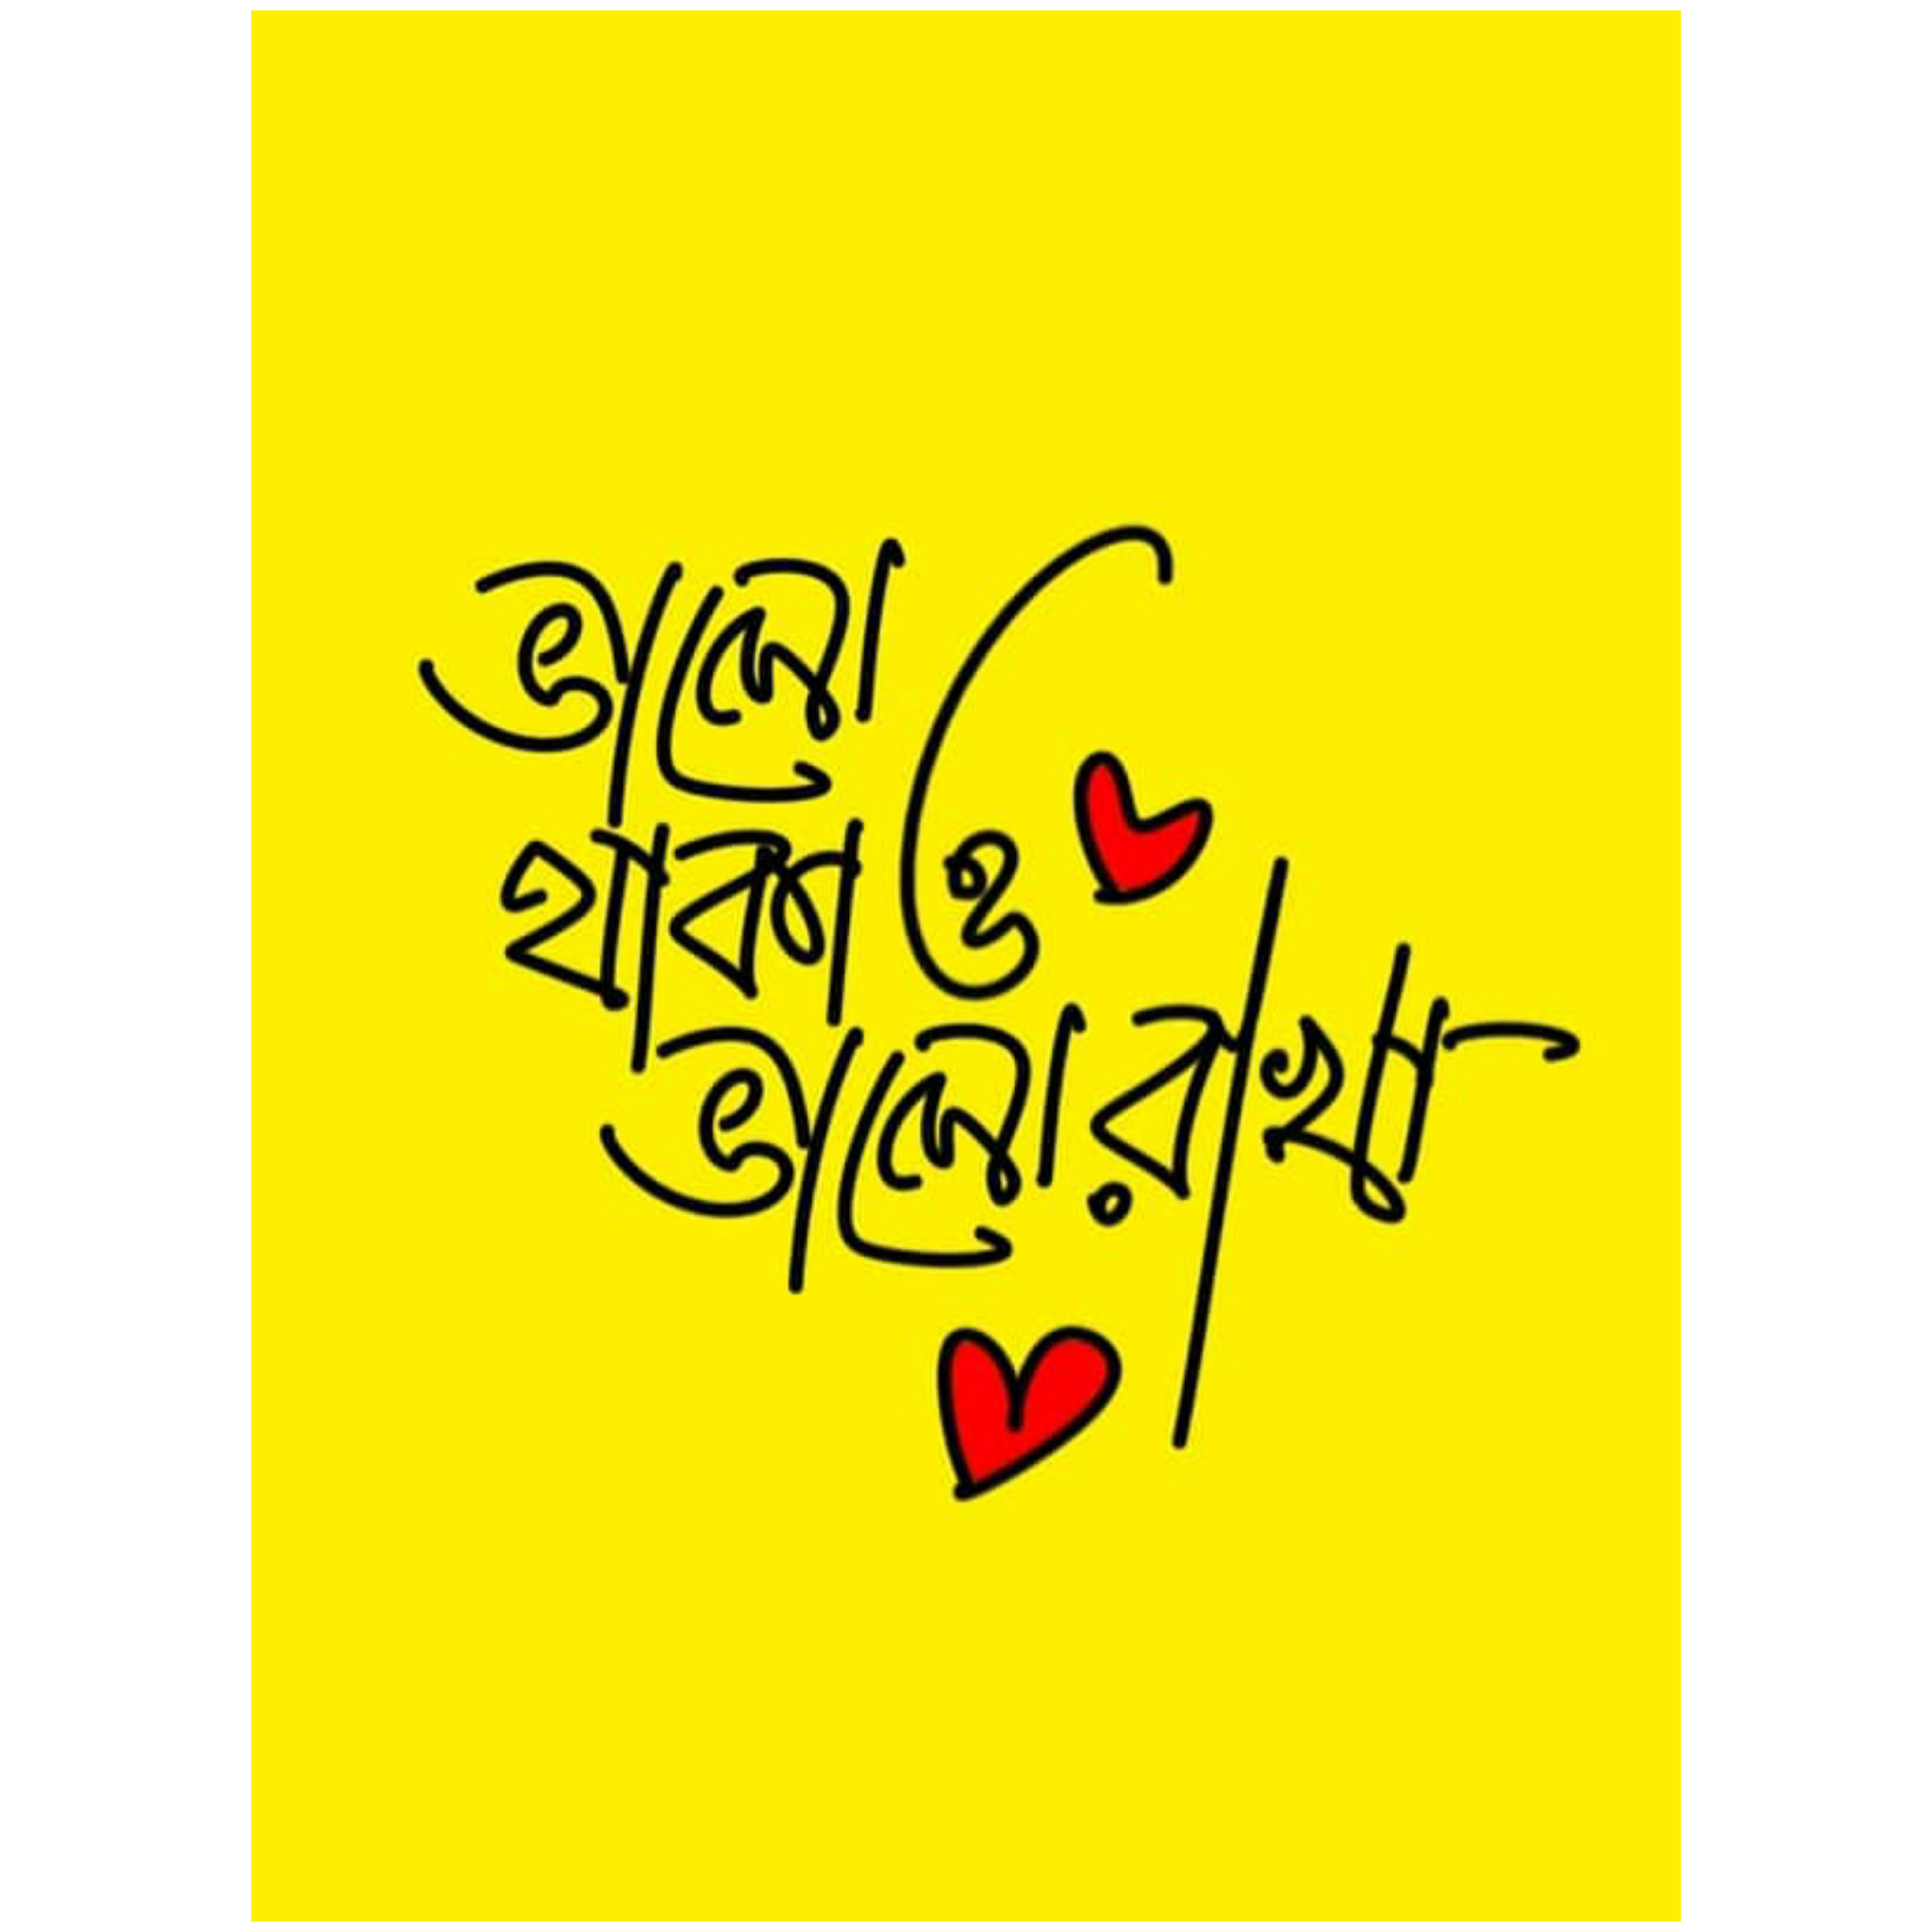 bangla status about life, love koster pic, valobashar koster photo, bangla koster picture, bangla valobashar image, bangla lekha picture, bangla love photo, bangla image photo